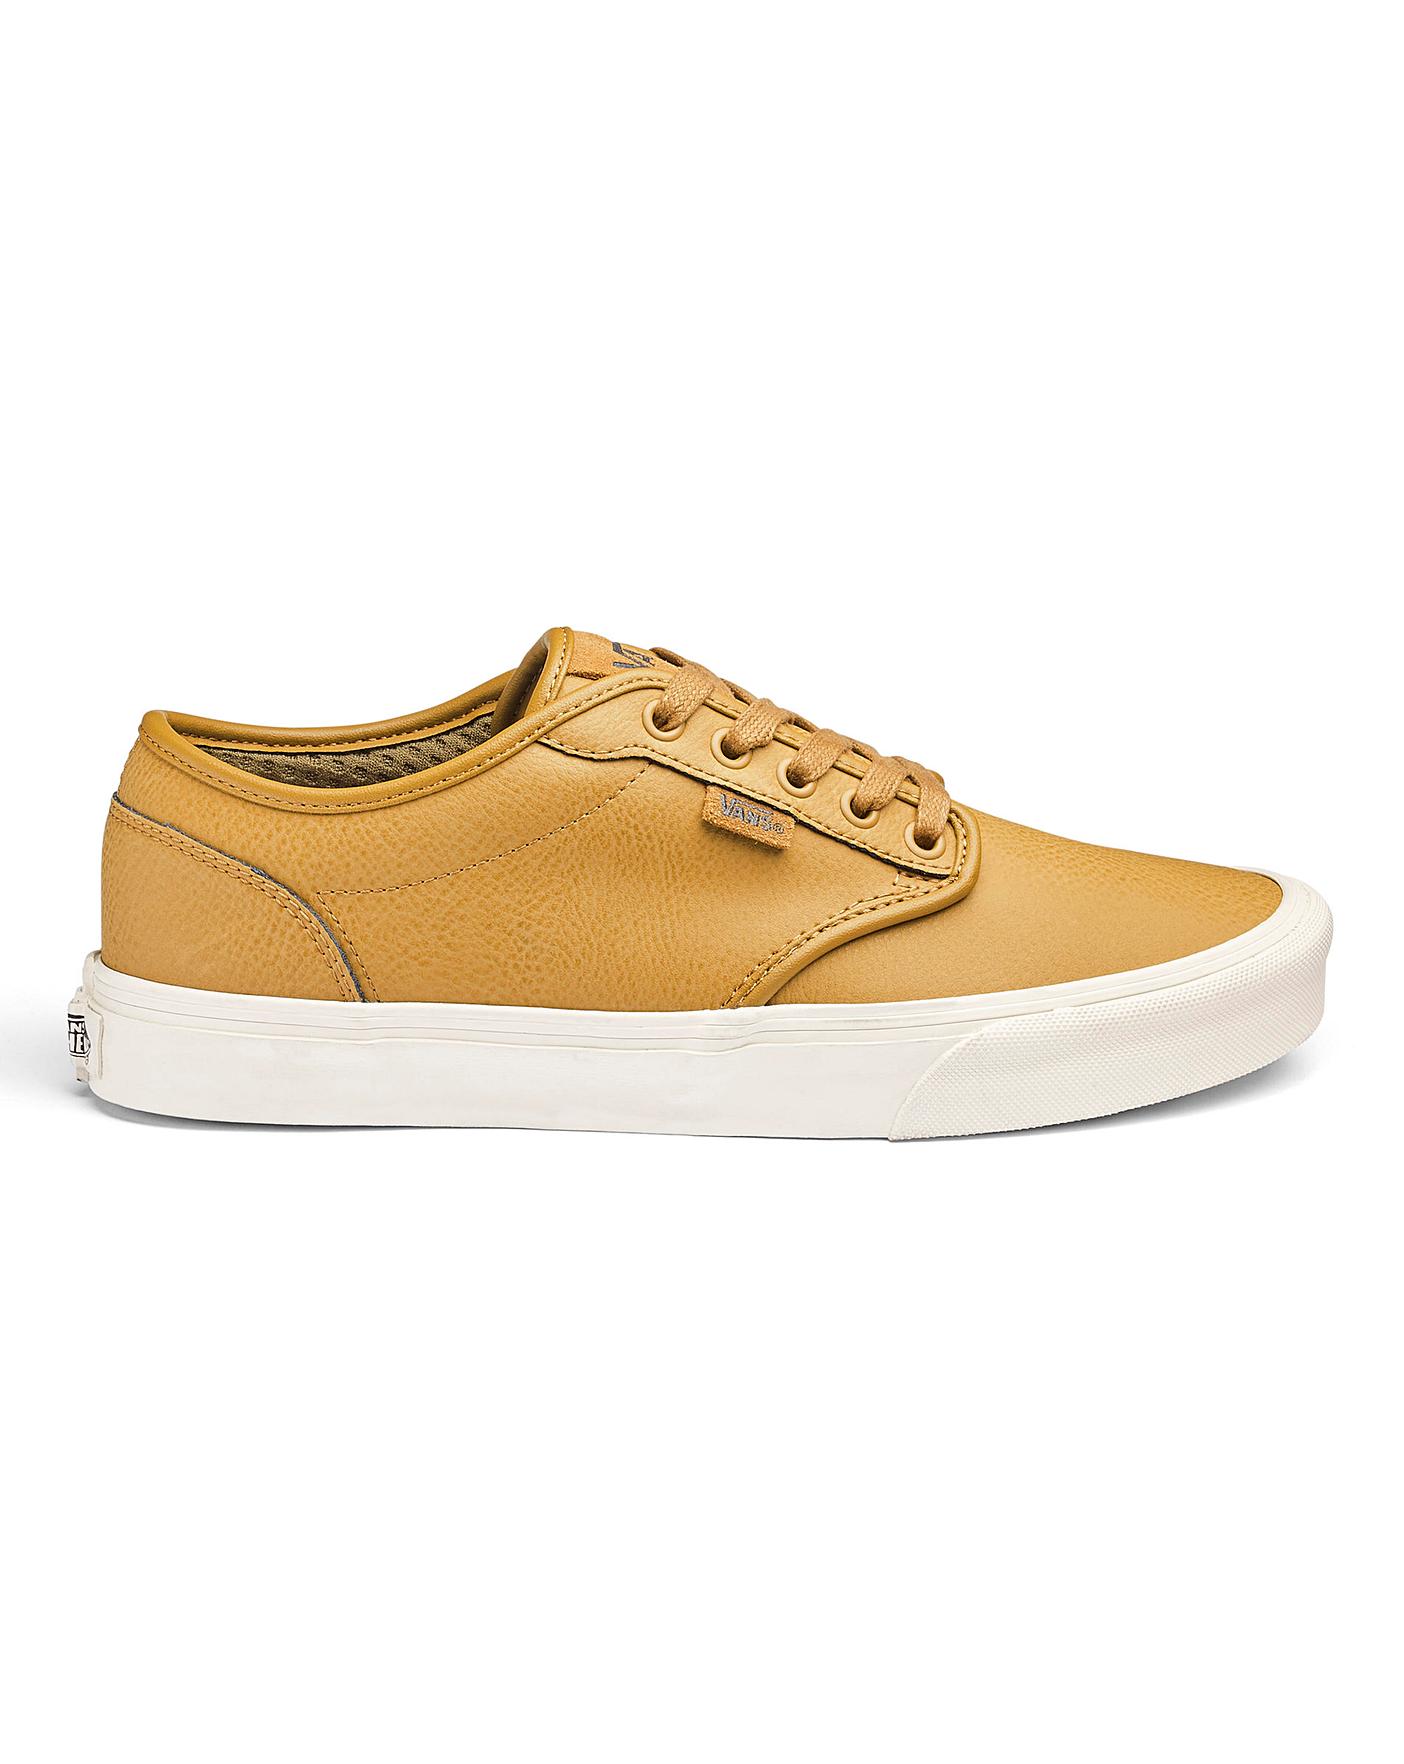 mens vans leather trainers